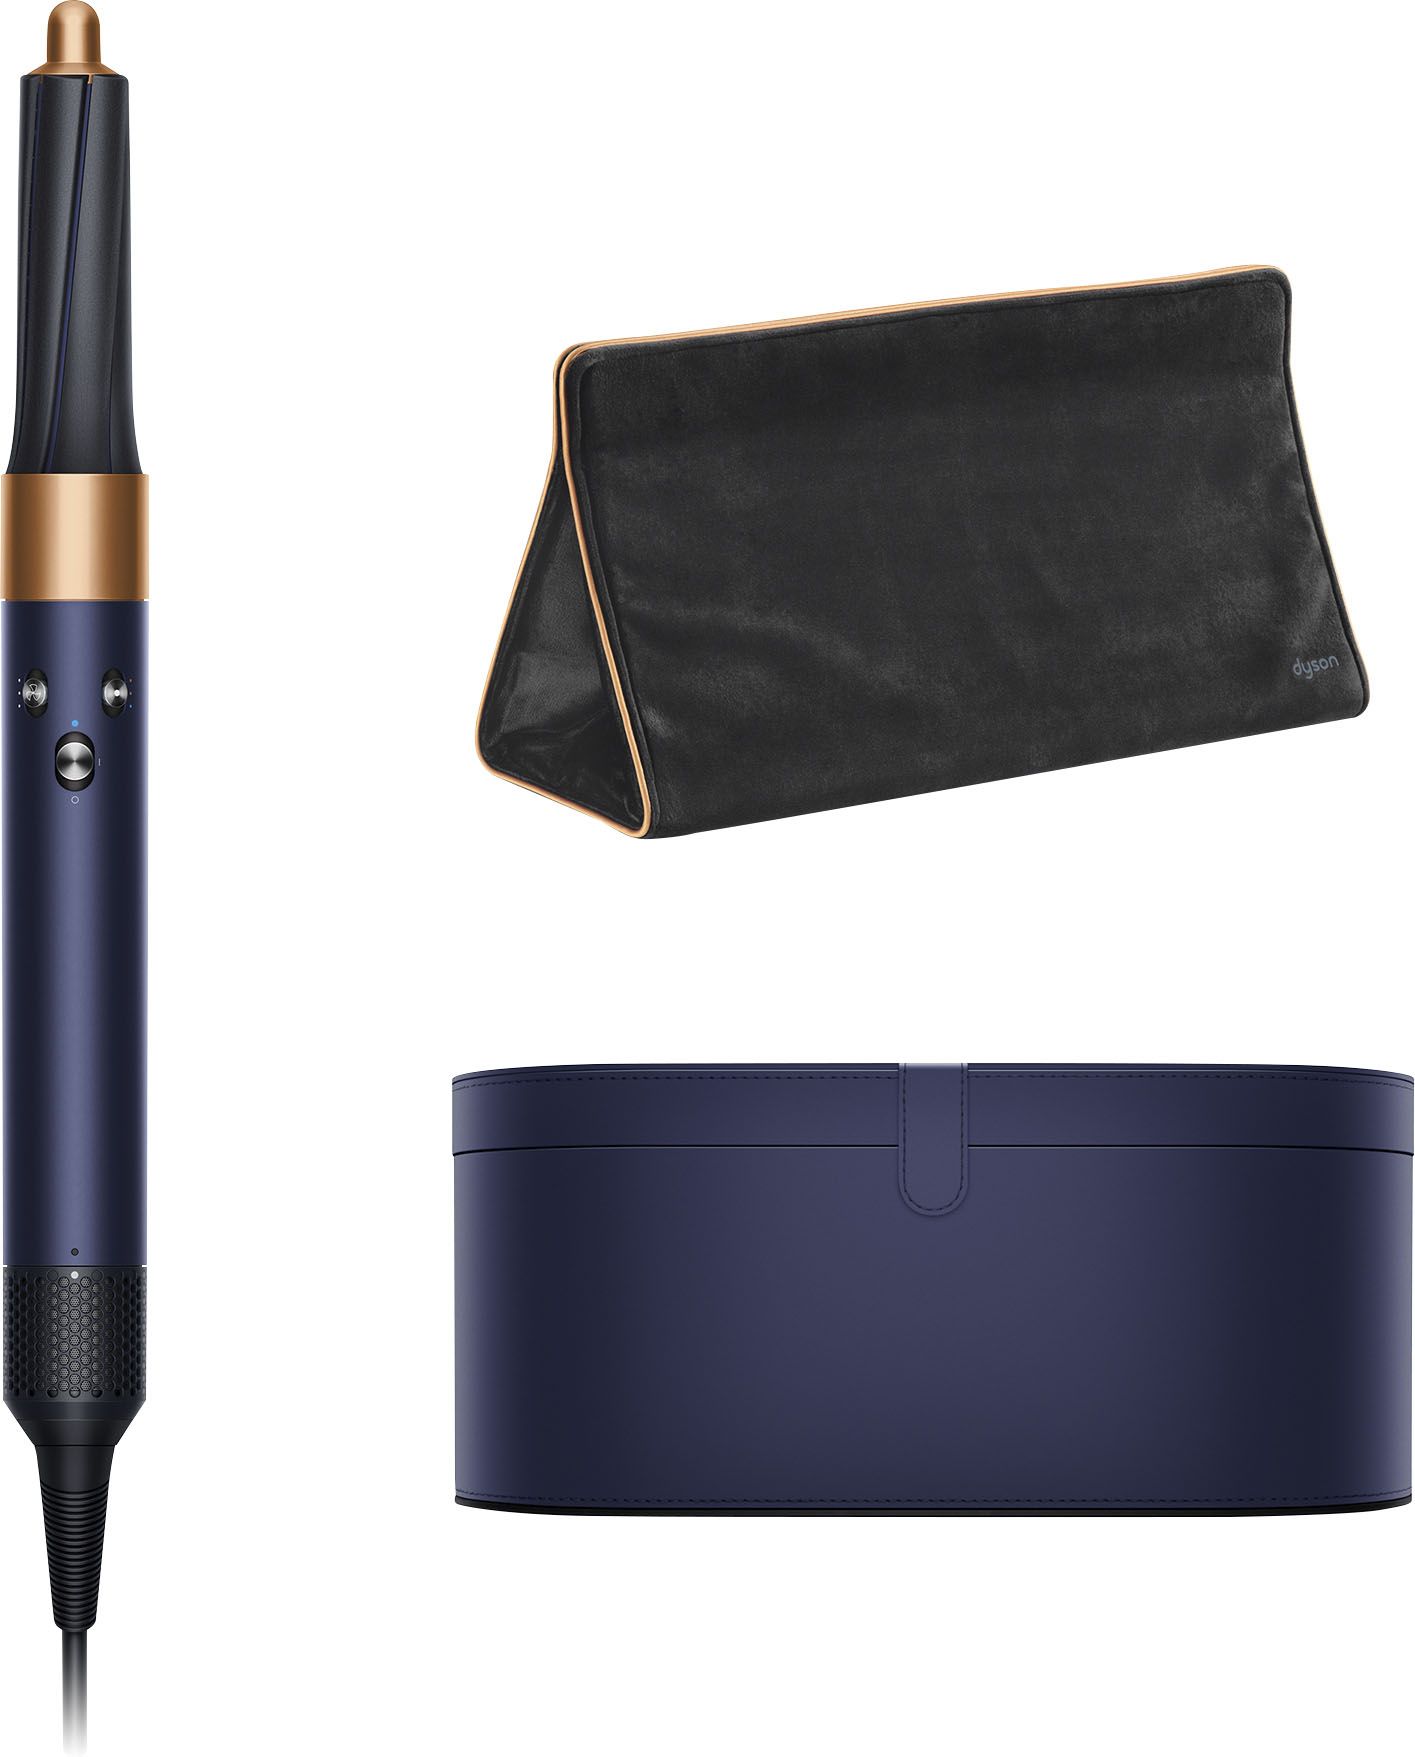 New special edition Dyson Airwrap styler complete Prussian blue/rich copper 372901-01 - Best Buy | Best Buy U.S.